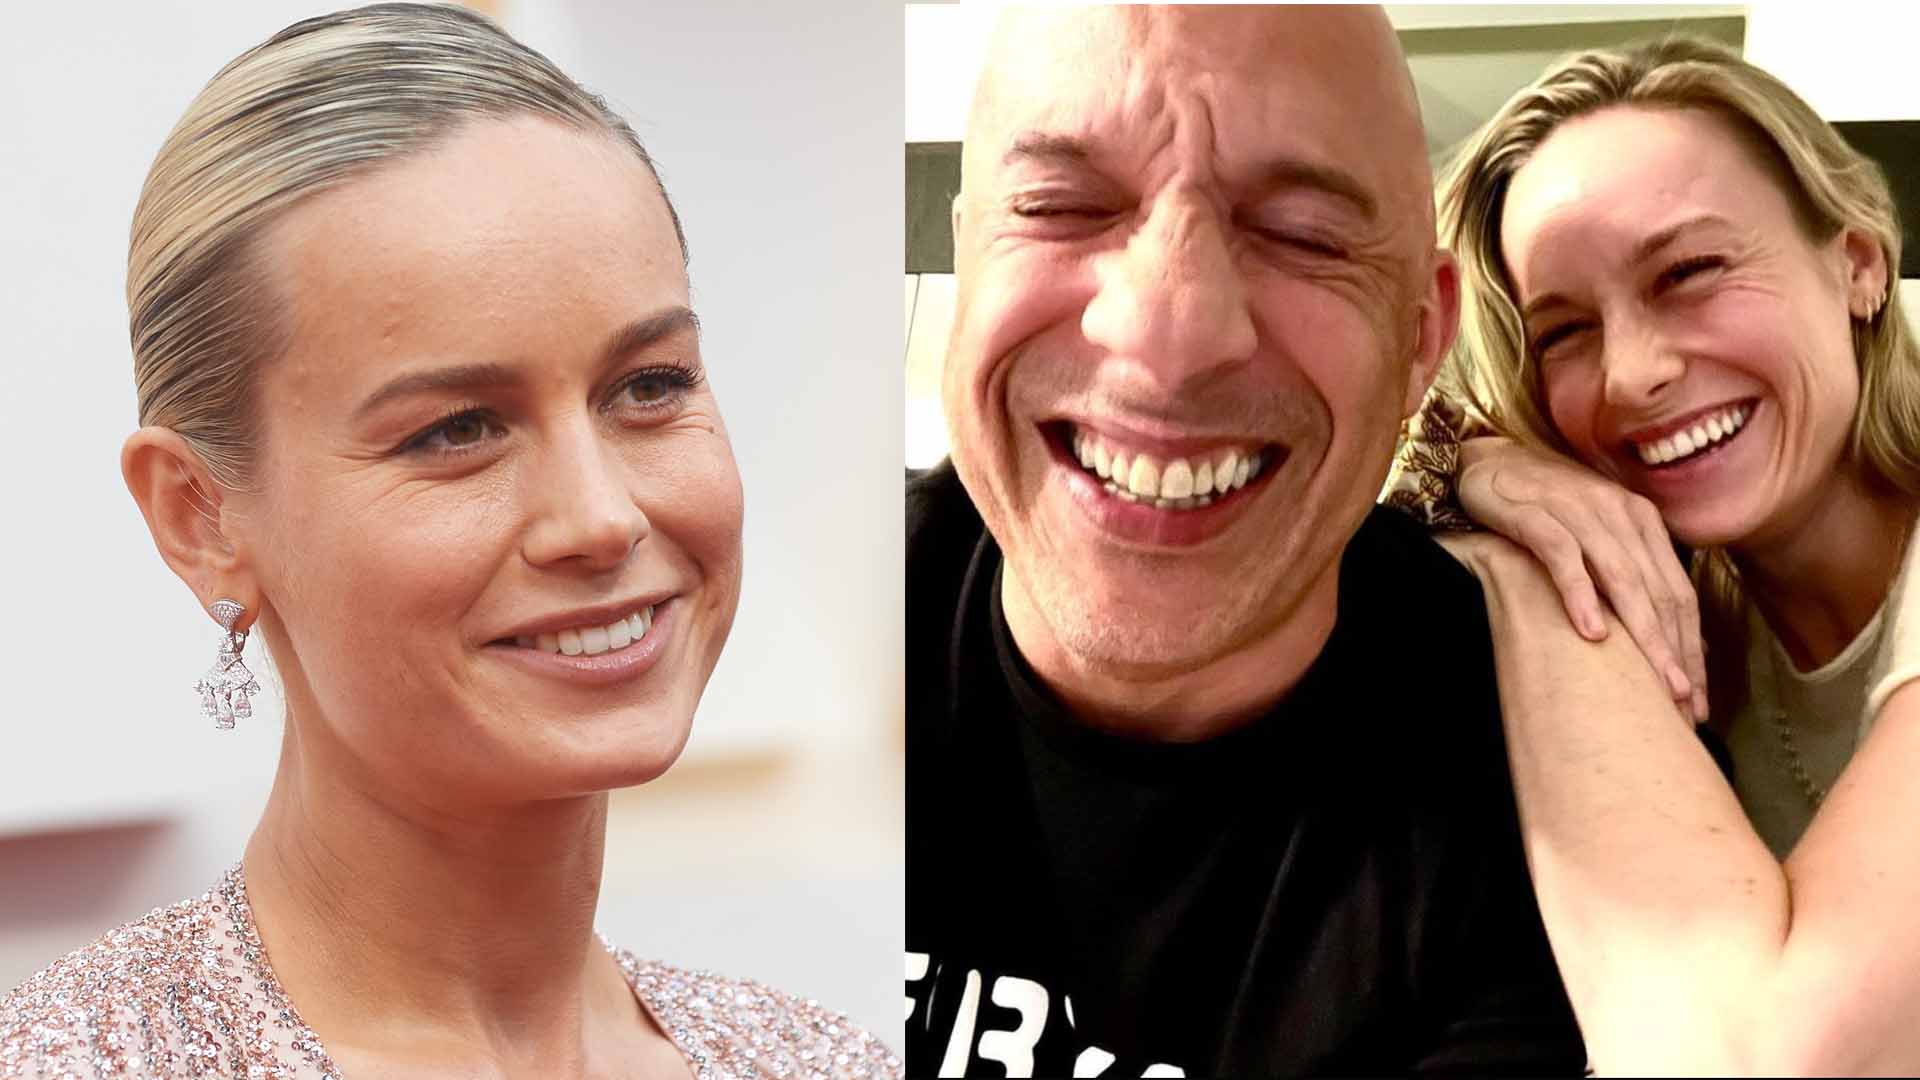 Brie Larson Joins Fast & Furious 10; She Will Bring Something Fans "Might Have Not Expected But Yearned For," Says Vin Diesel